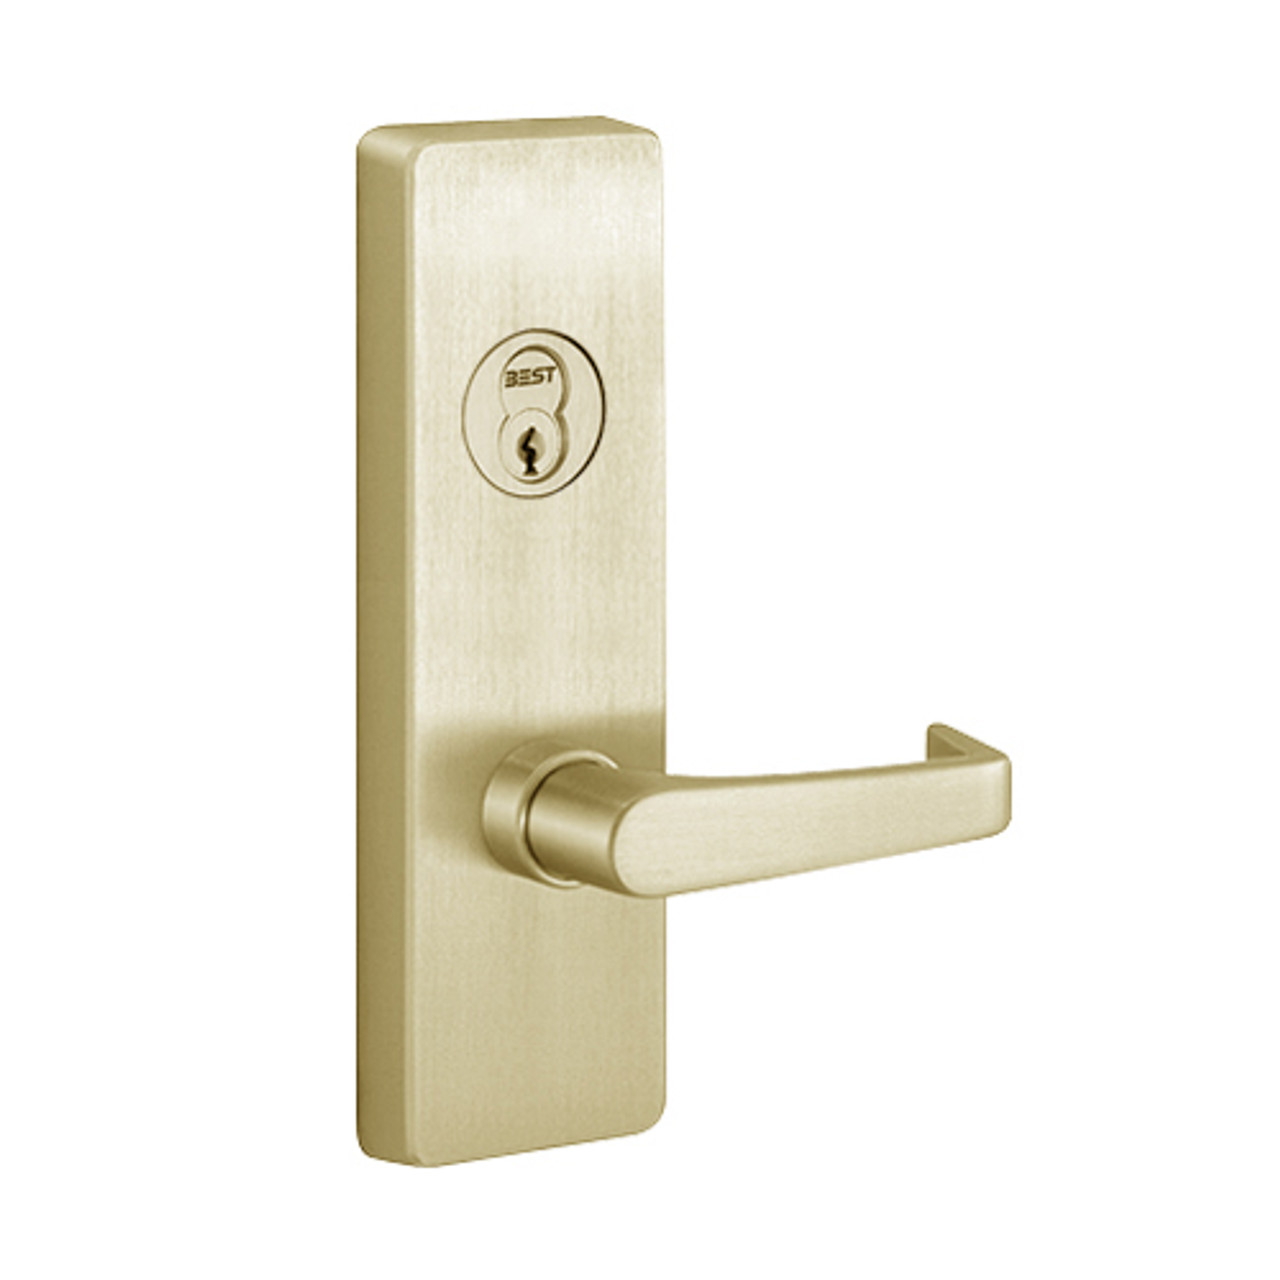 Y4914A-606-LHR PHI Lever Retrofit Trim Always Active with A Lever Design for Olympian Series Exit Device in Satin Brass Finish